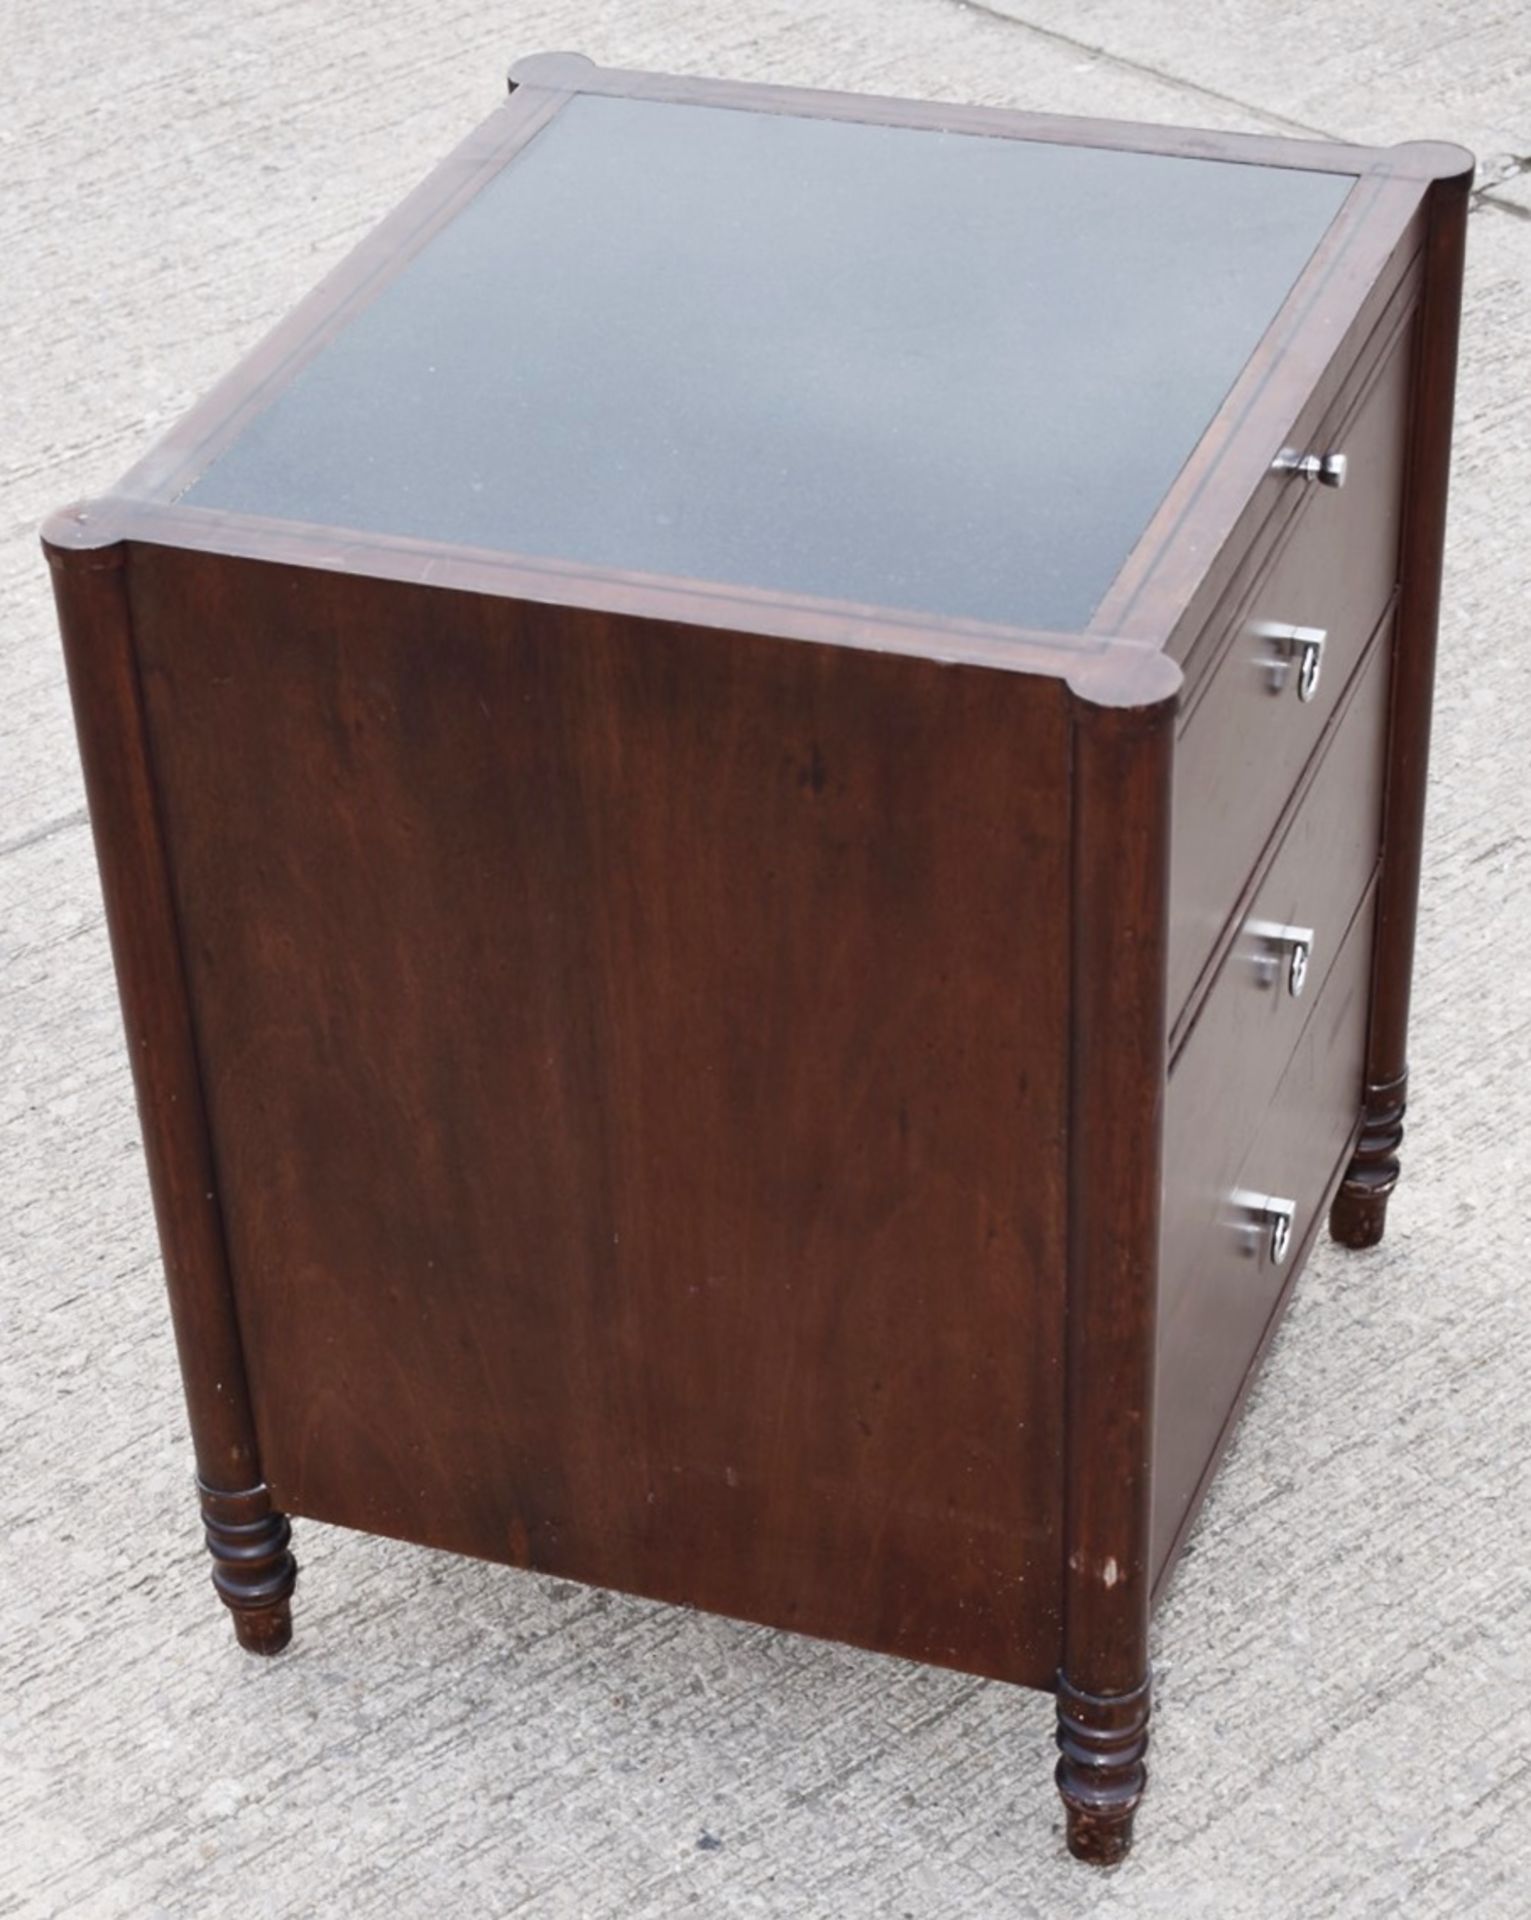 1 x CHANNELS Classically Styled Designer Solid Wood End Table with Pull-Out Tray, 1-Drawer Storage - Image 2 of 5